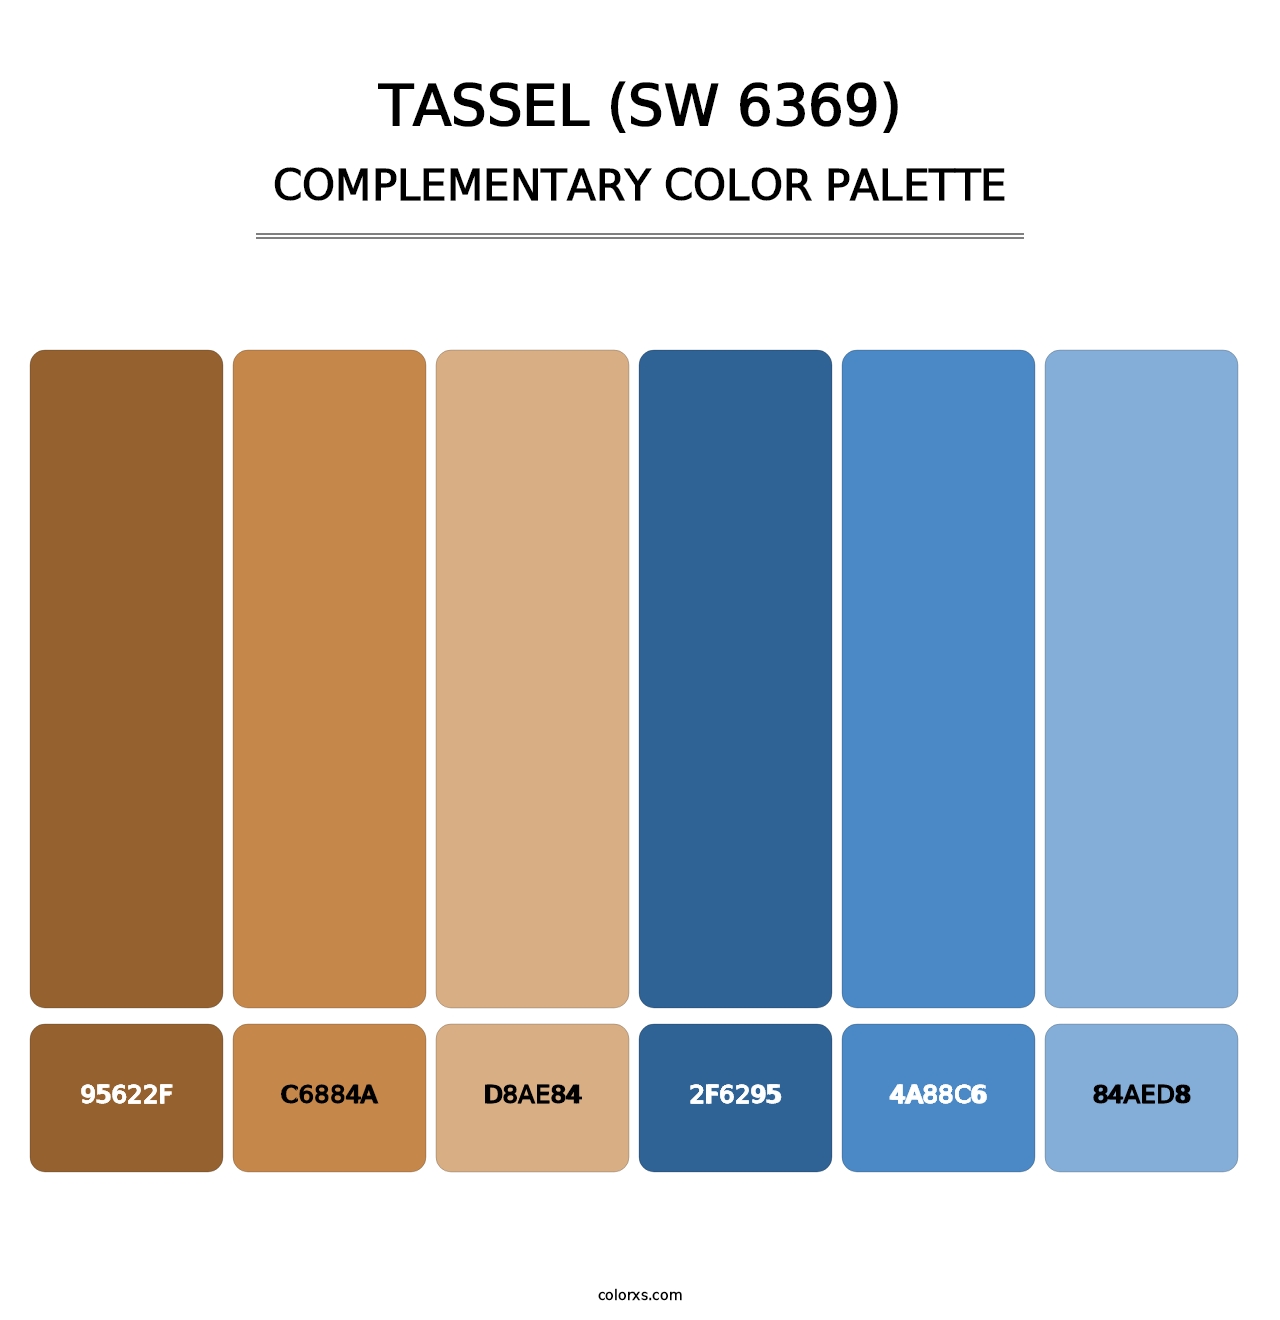 Tassel (SW 6369) - Complementary Color Palette